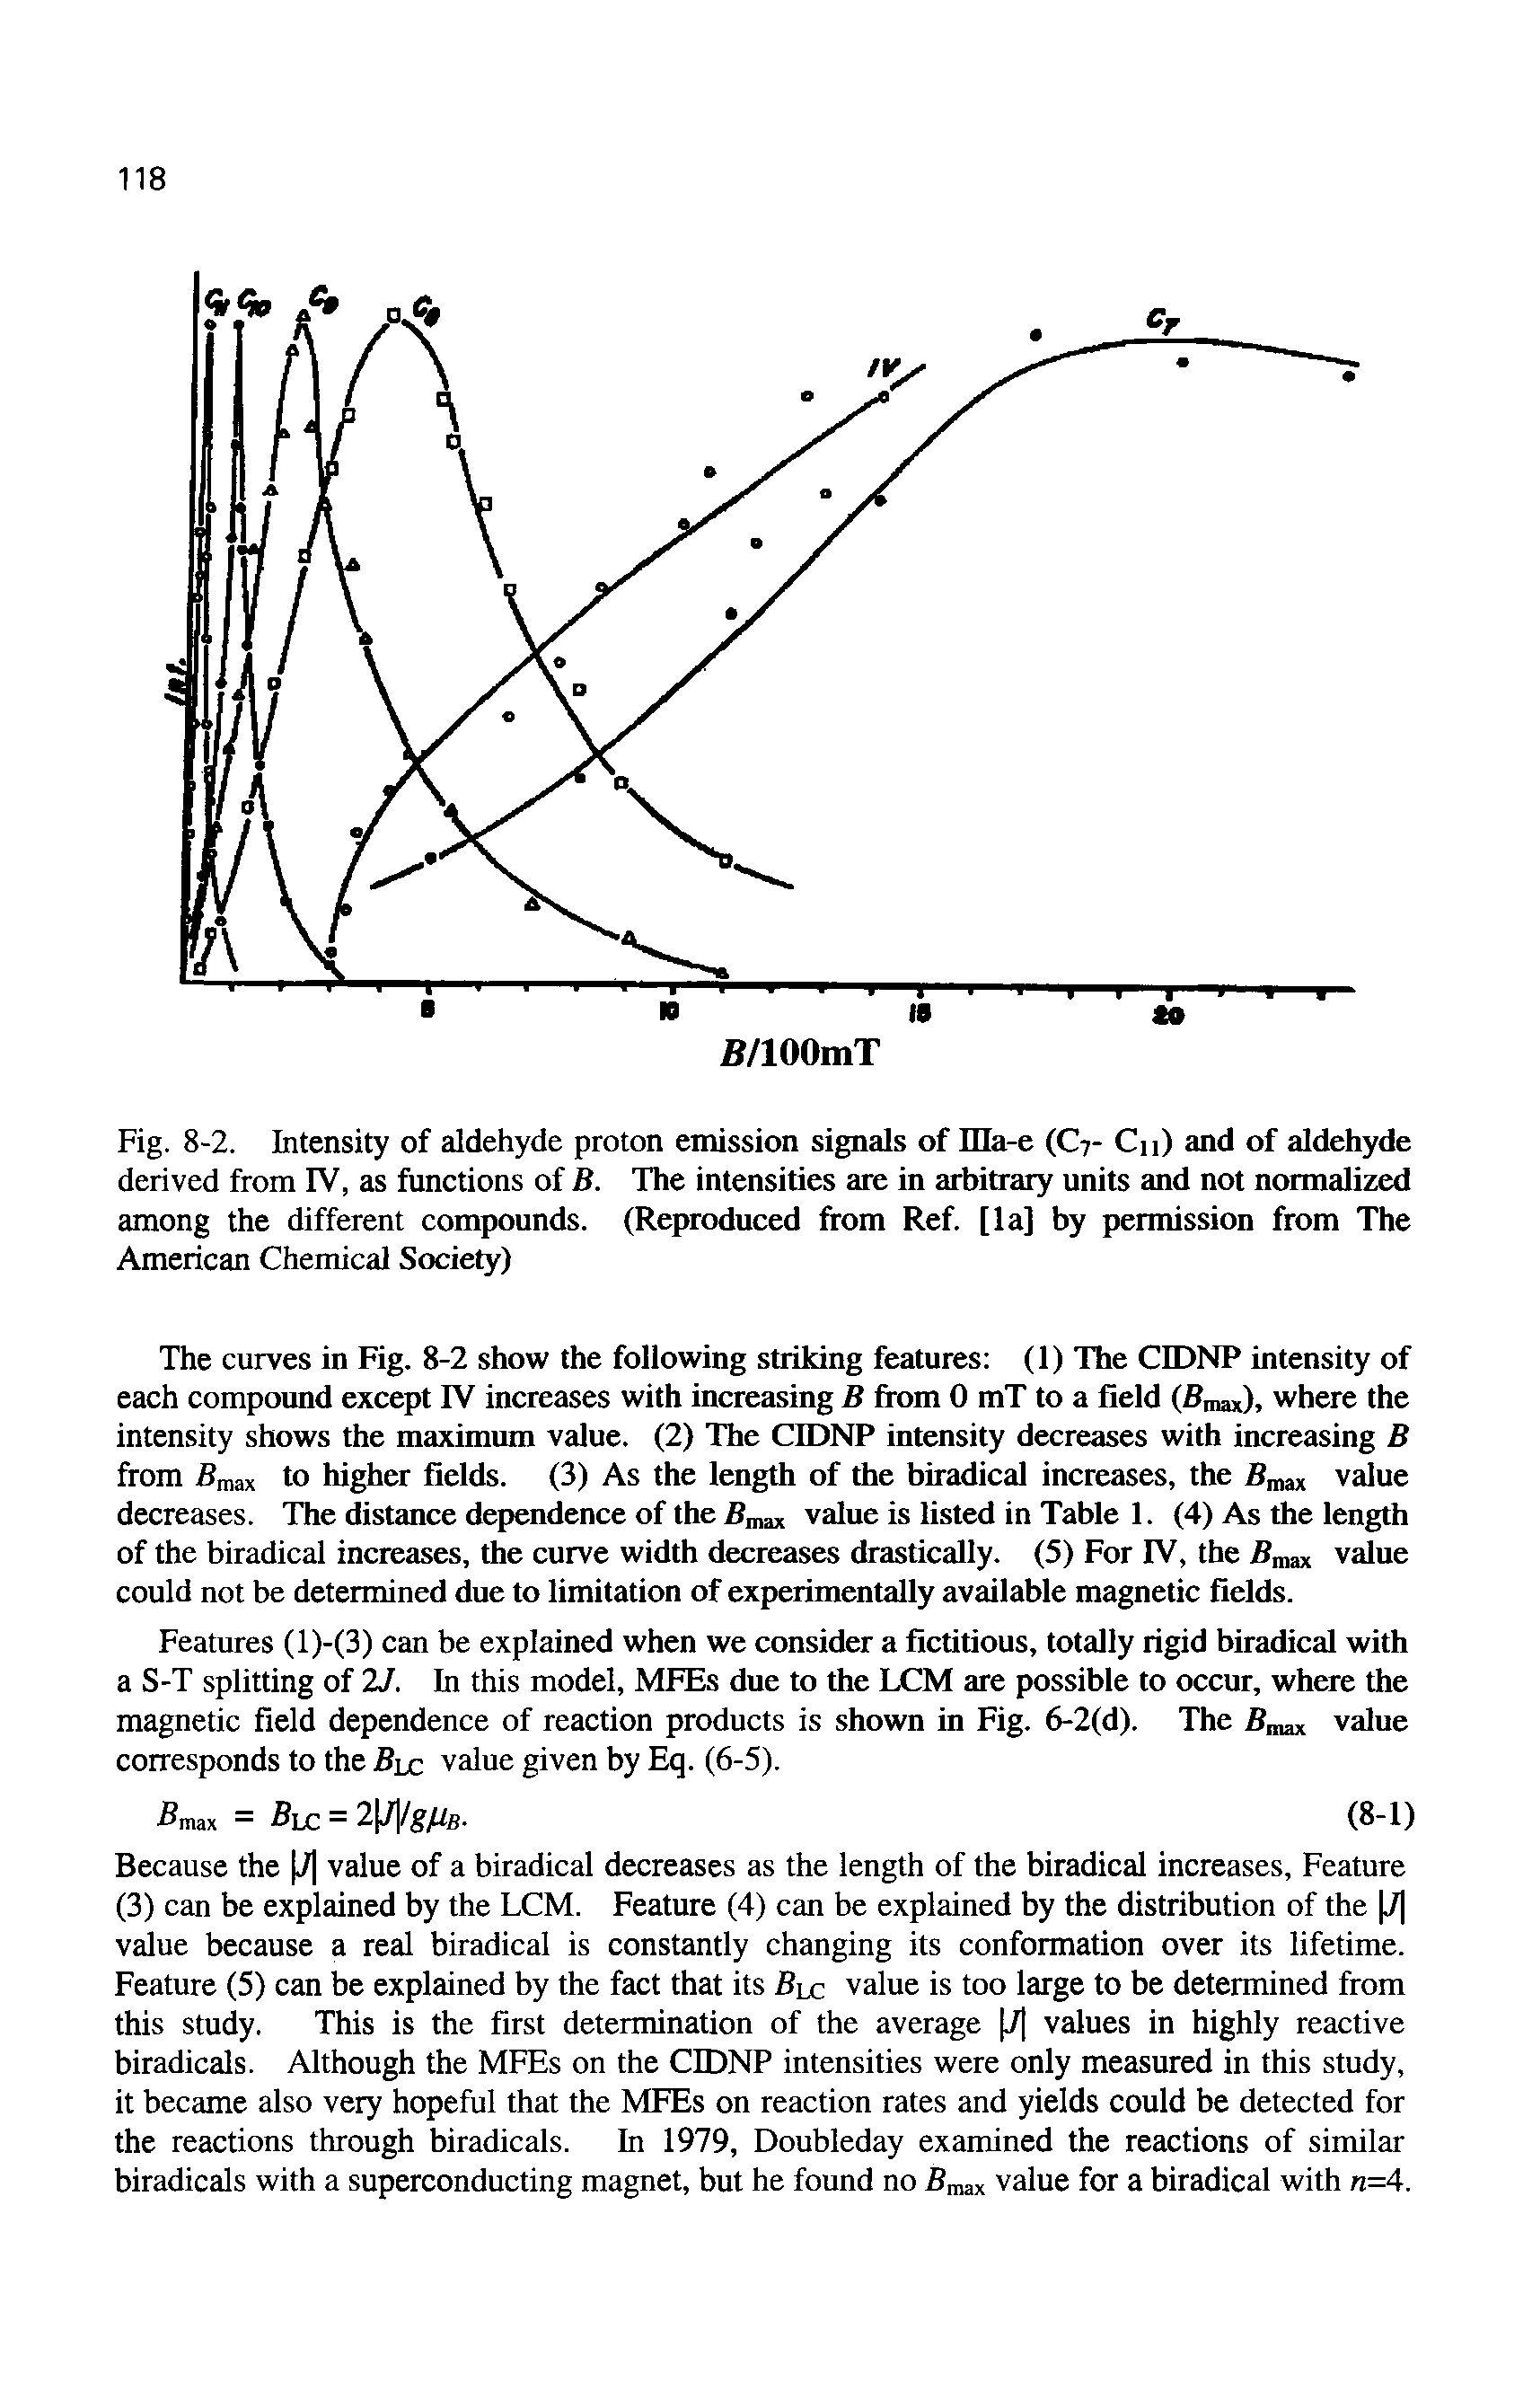 Fig. 8-2. Intensity of aldehyde proton emission signals of IHa-e (C7- Cn) and of aldehyde derived from IV, as functions of B. The intensities are in arbitrary units and not normalized among the different compounds. (Reproduced from Ref. [la] by permission from The American Chemical Society)...